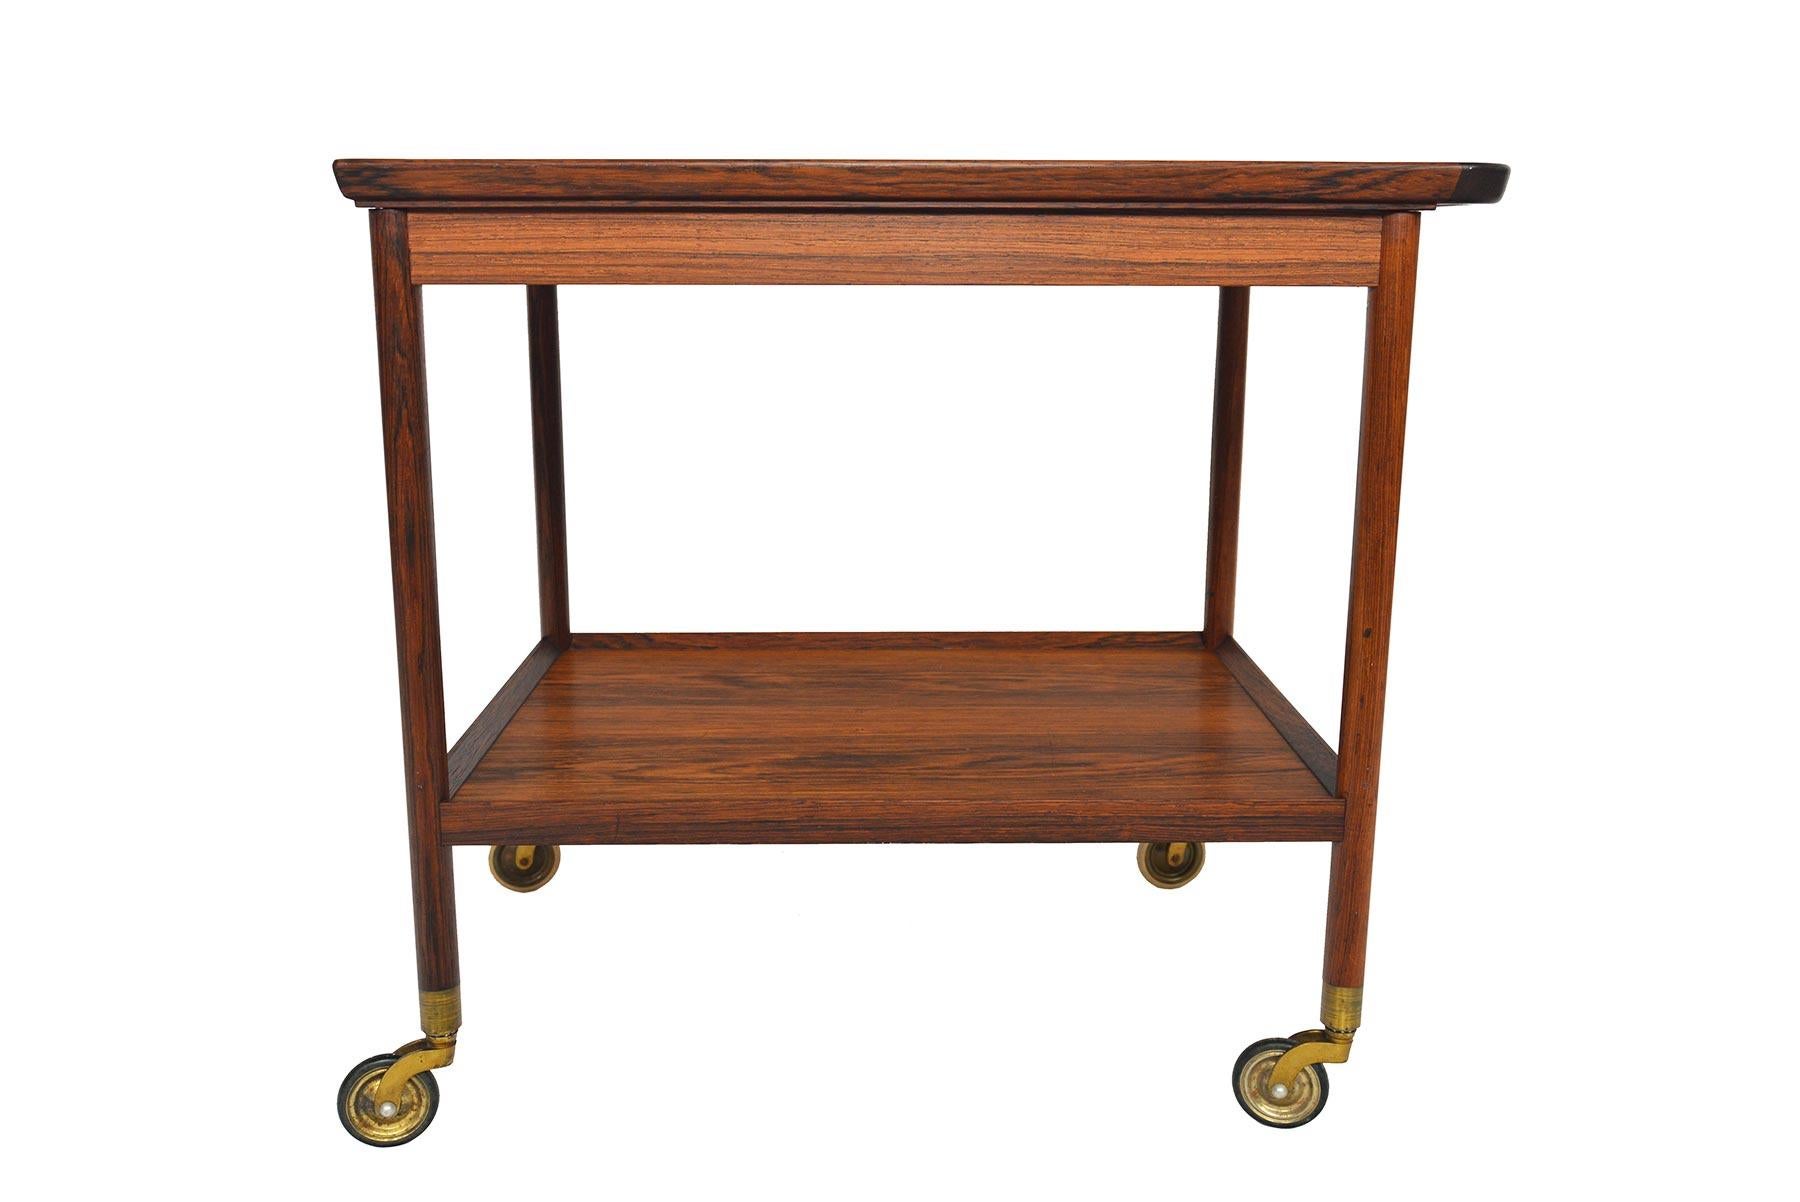 This Danish midcentury bar cart by Ludvig Pontoppidan in Brazilian rosewood is ideal for modern entertaining! The two tier design offers a black laminate serving top, a lower level for storage, and a seamless handle for convenient mobility. Cart